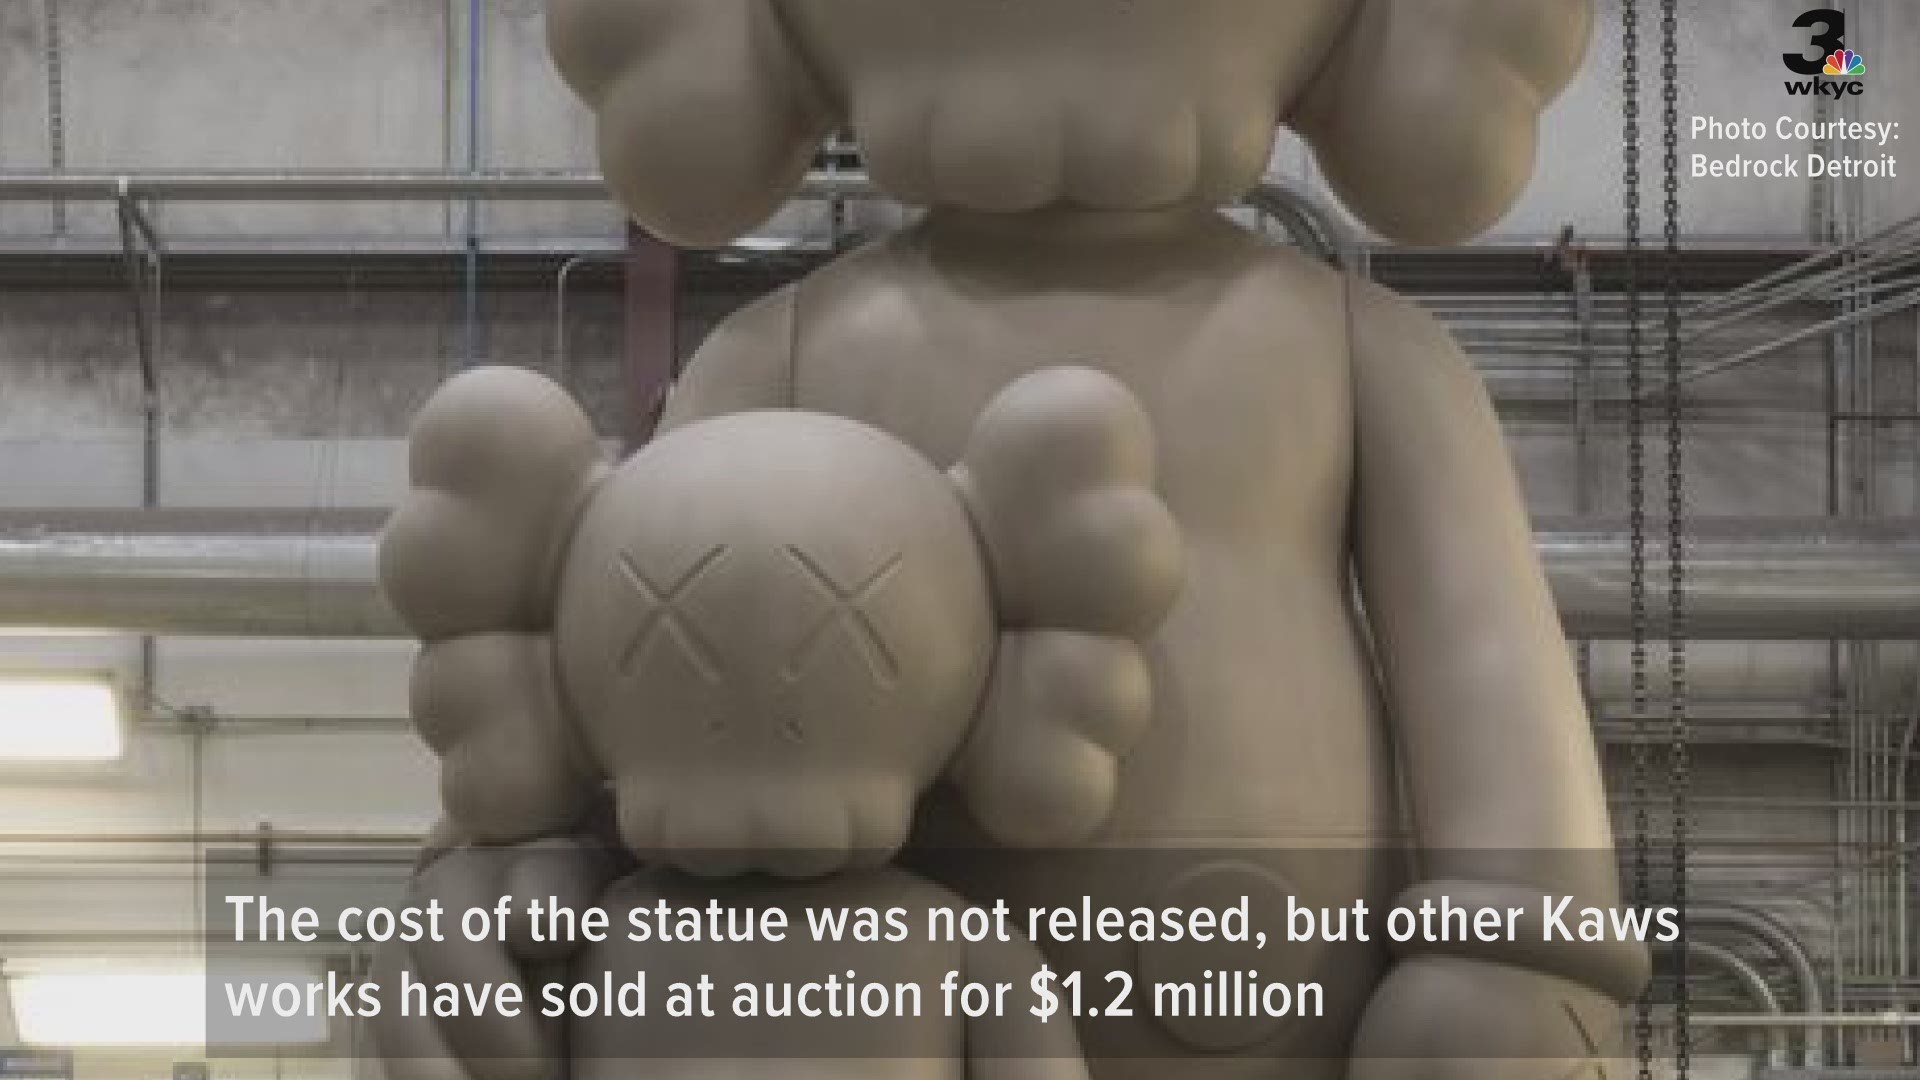 Cleveland Cavaliers owner Dan Gilbert buys 17-foot-tall statue for downtown Detroit